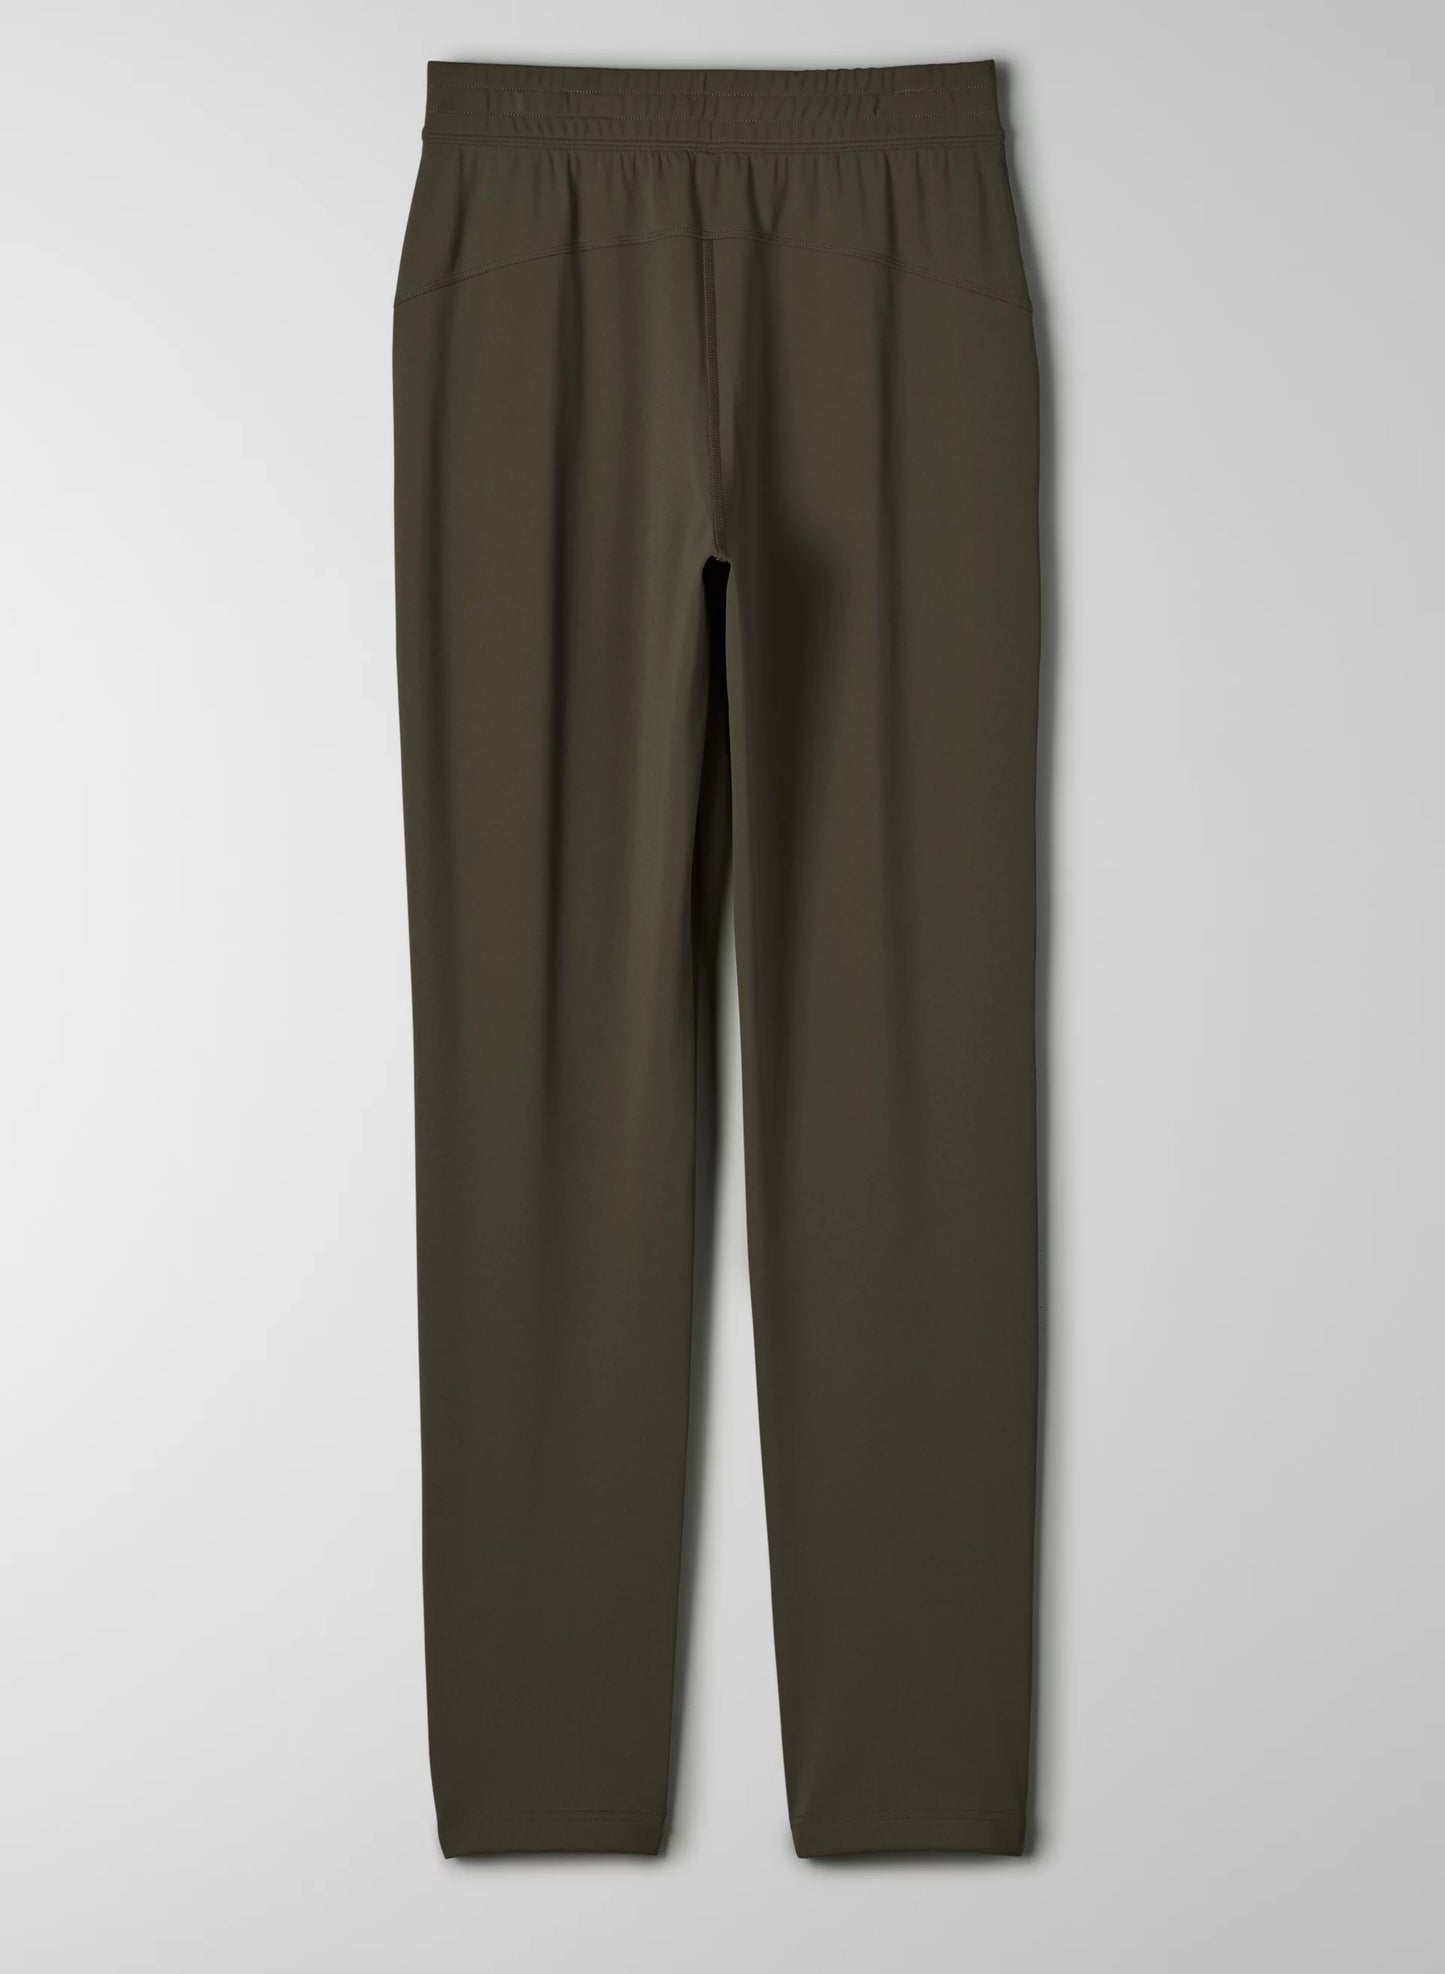 The Group by Babaton Weekender Pant (S) – Somewear